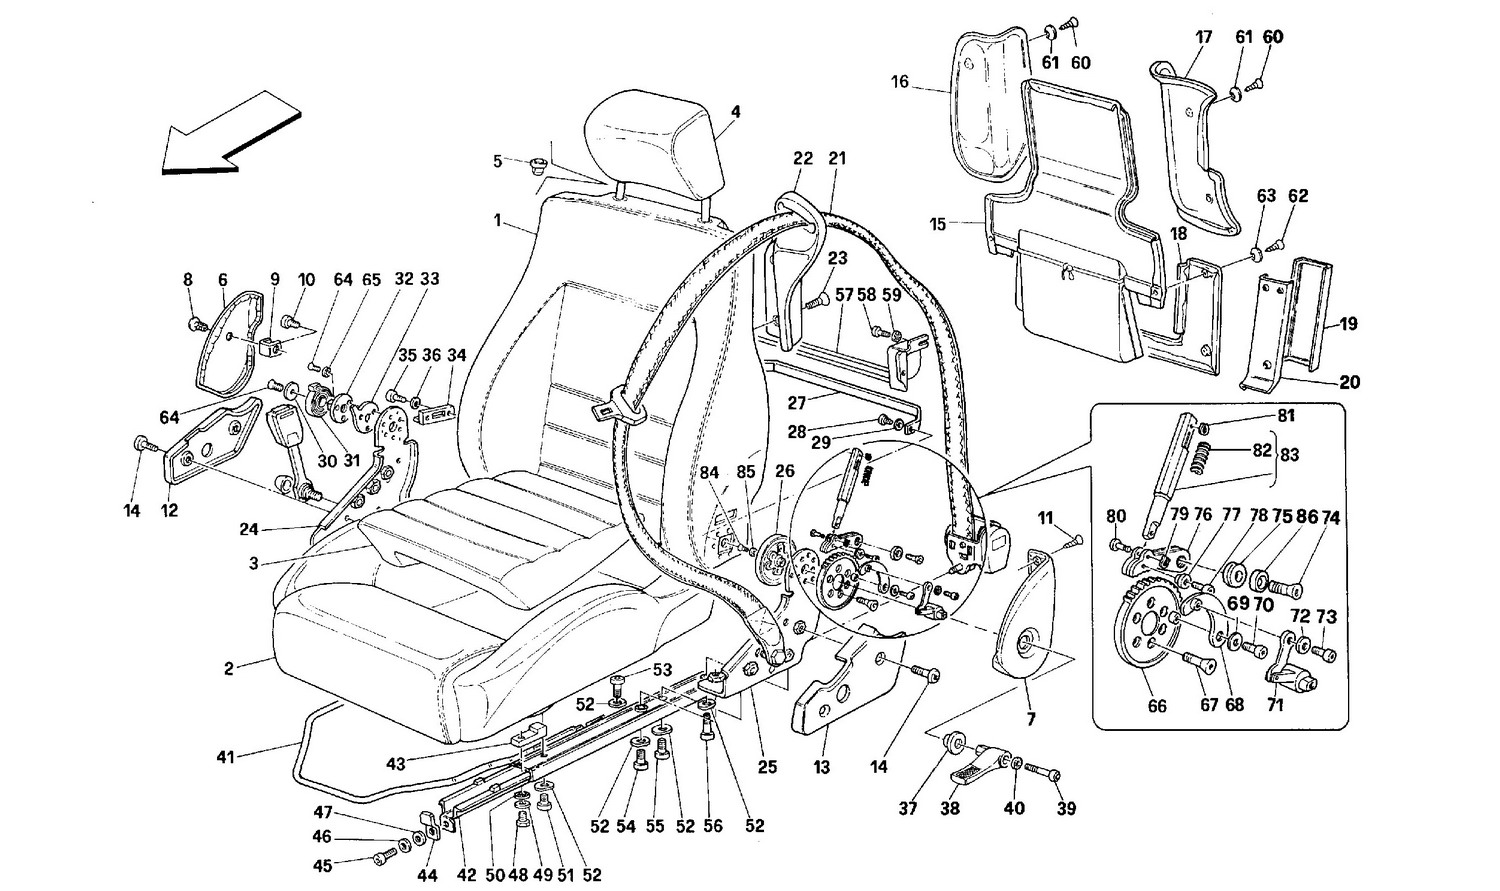 Schematic: Seats And Safety Belts -Valid For Spider - Not For Usa-